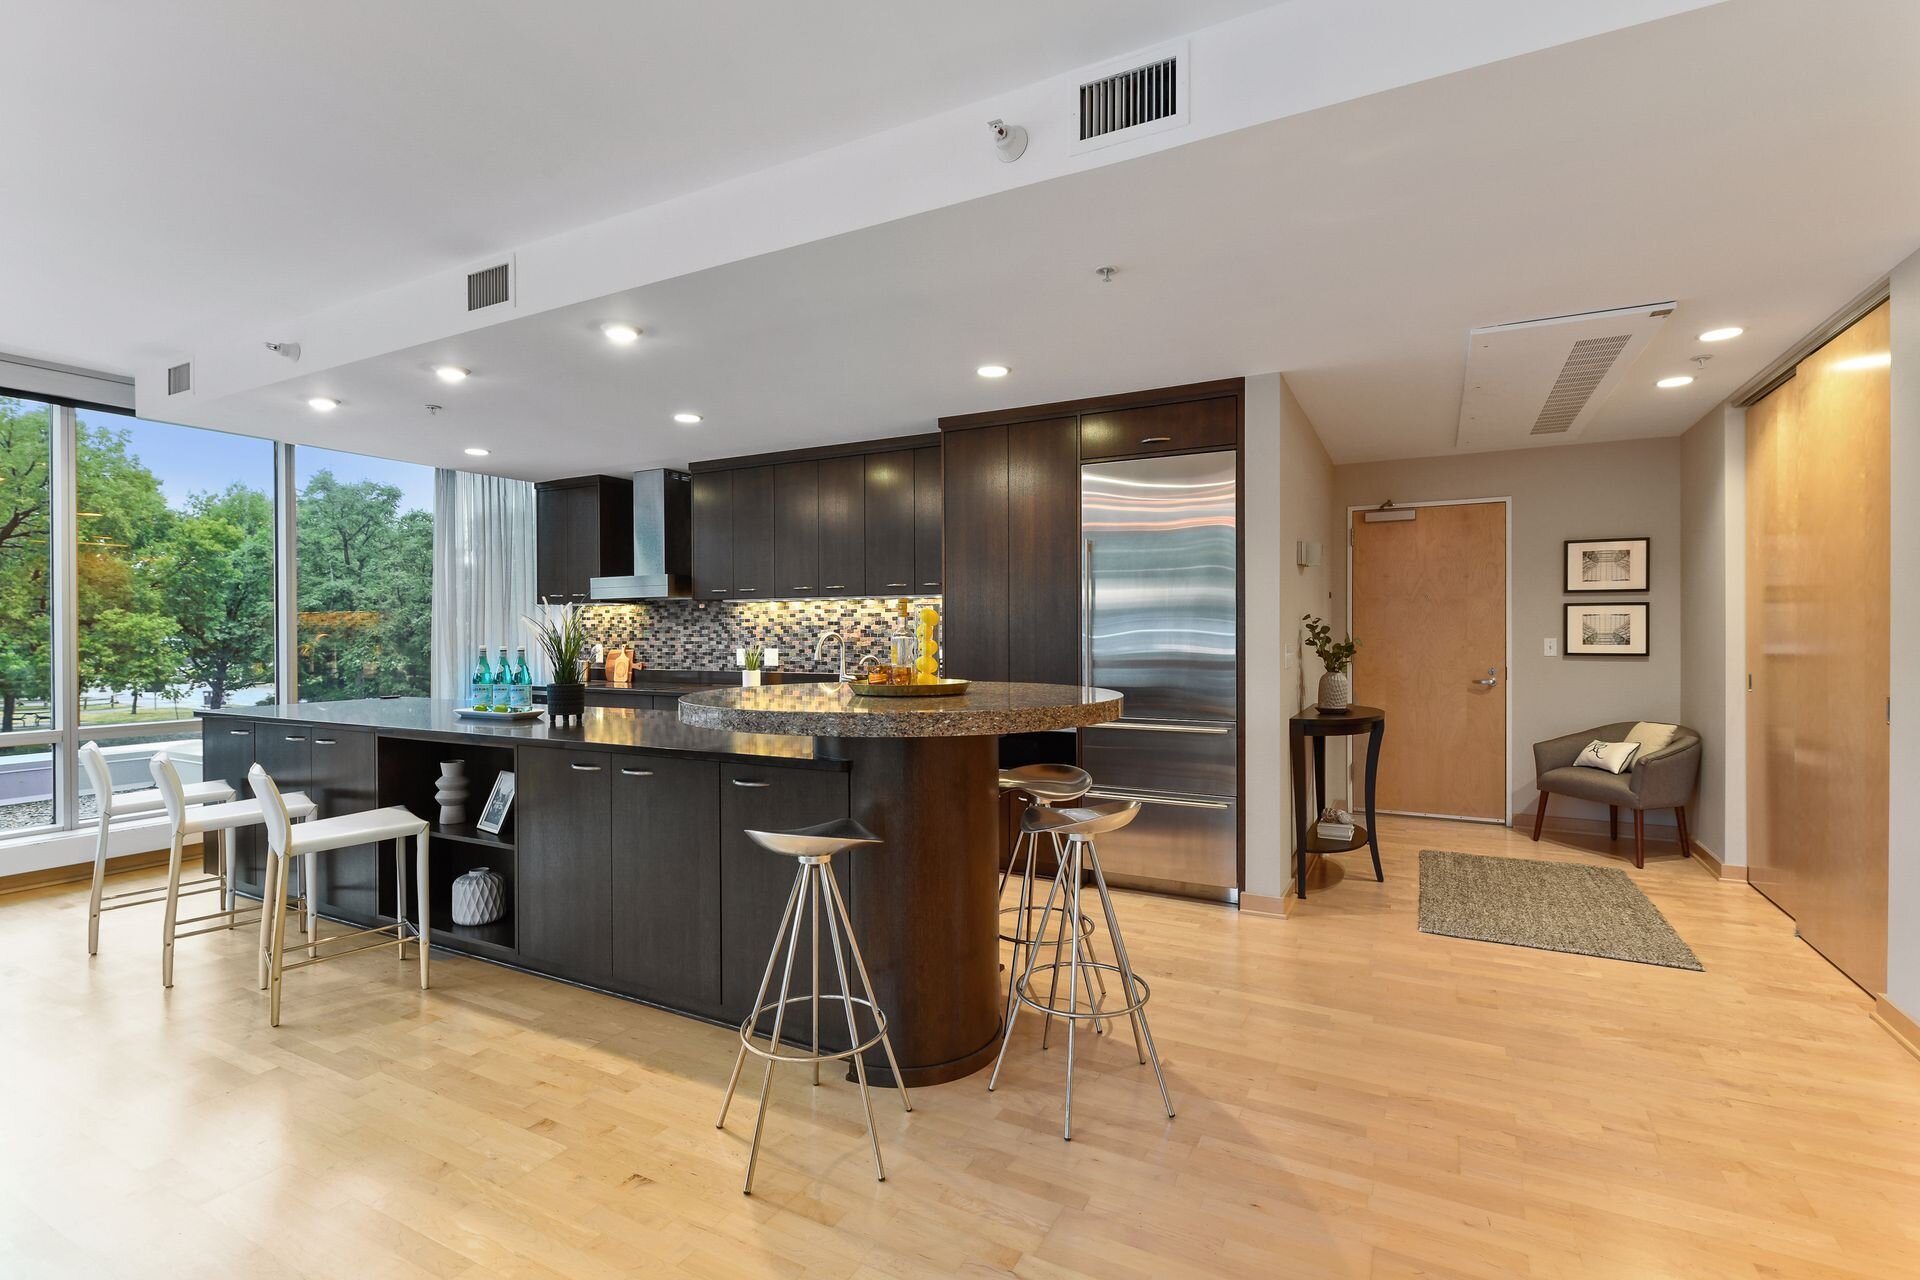 5 Kitchen with Ample Seating and Entertainment Space.jpg